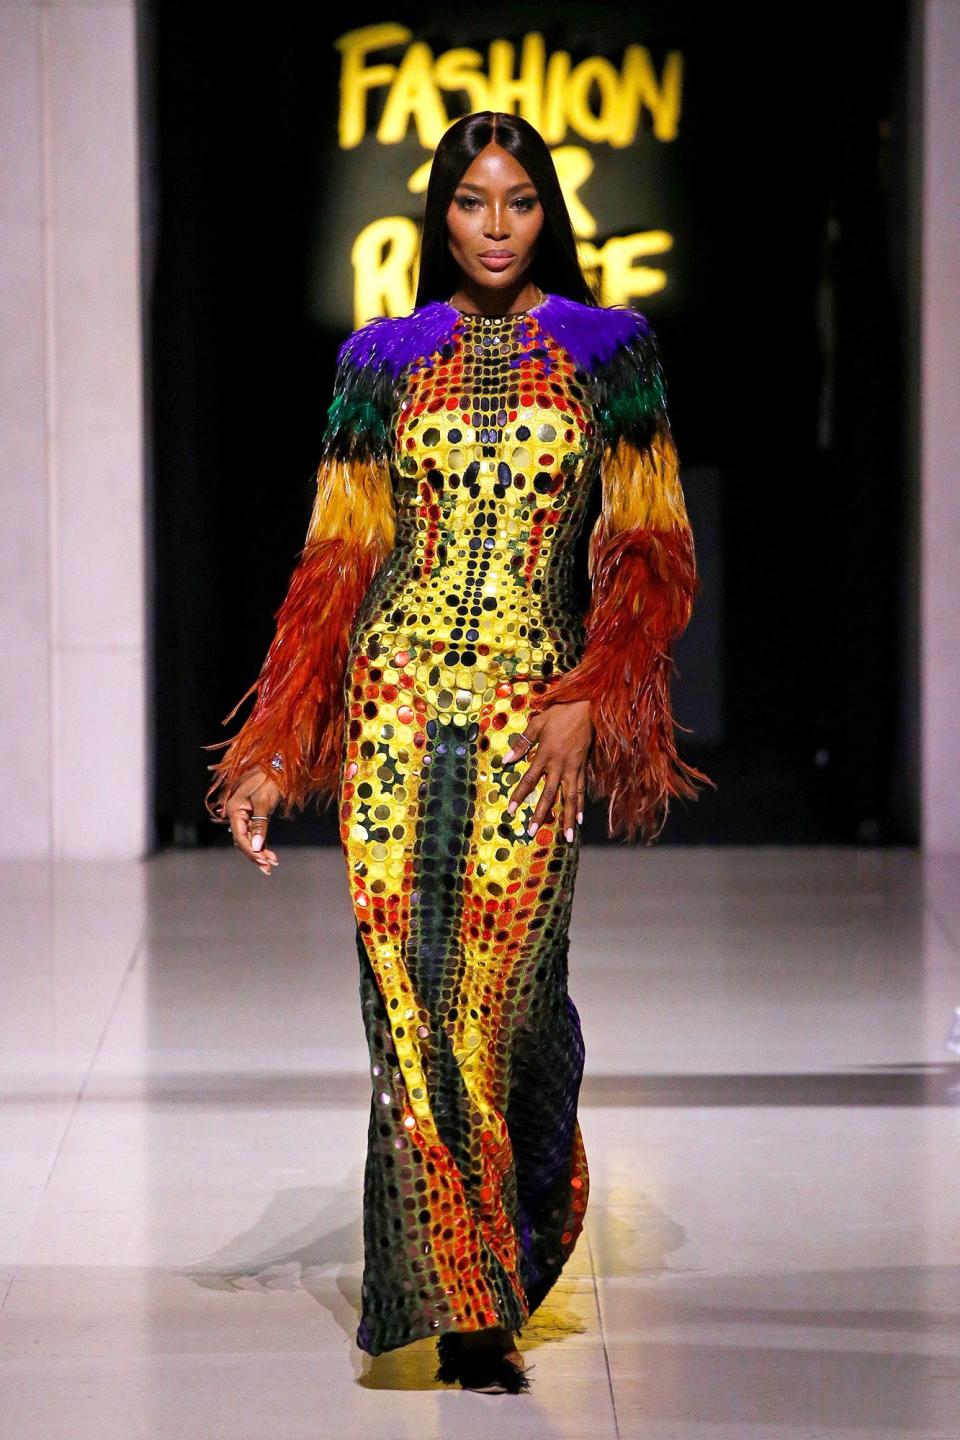 Naomi Campbell struts on the Fashion for Relief catwalk during London Fashion Week on Saturday.